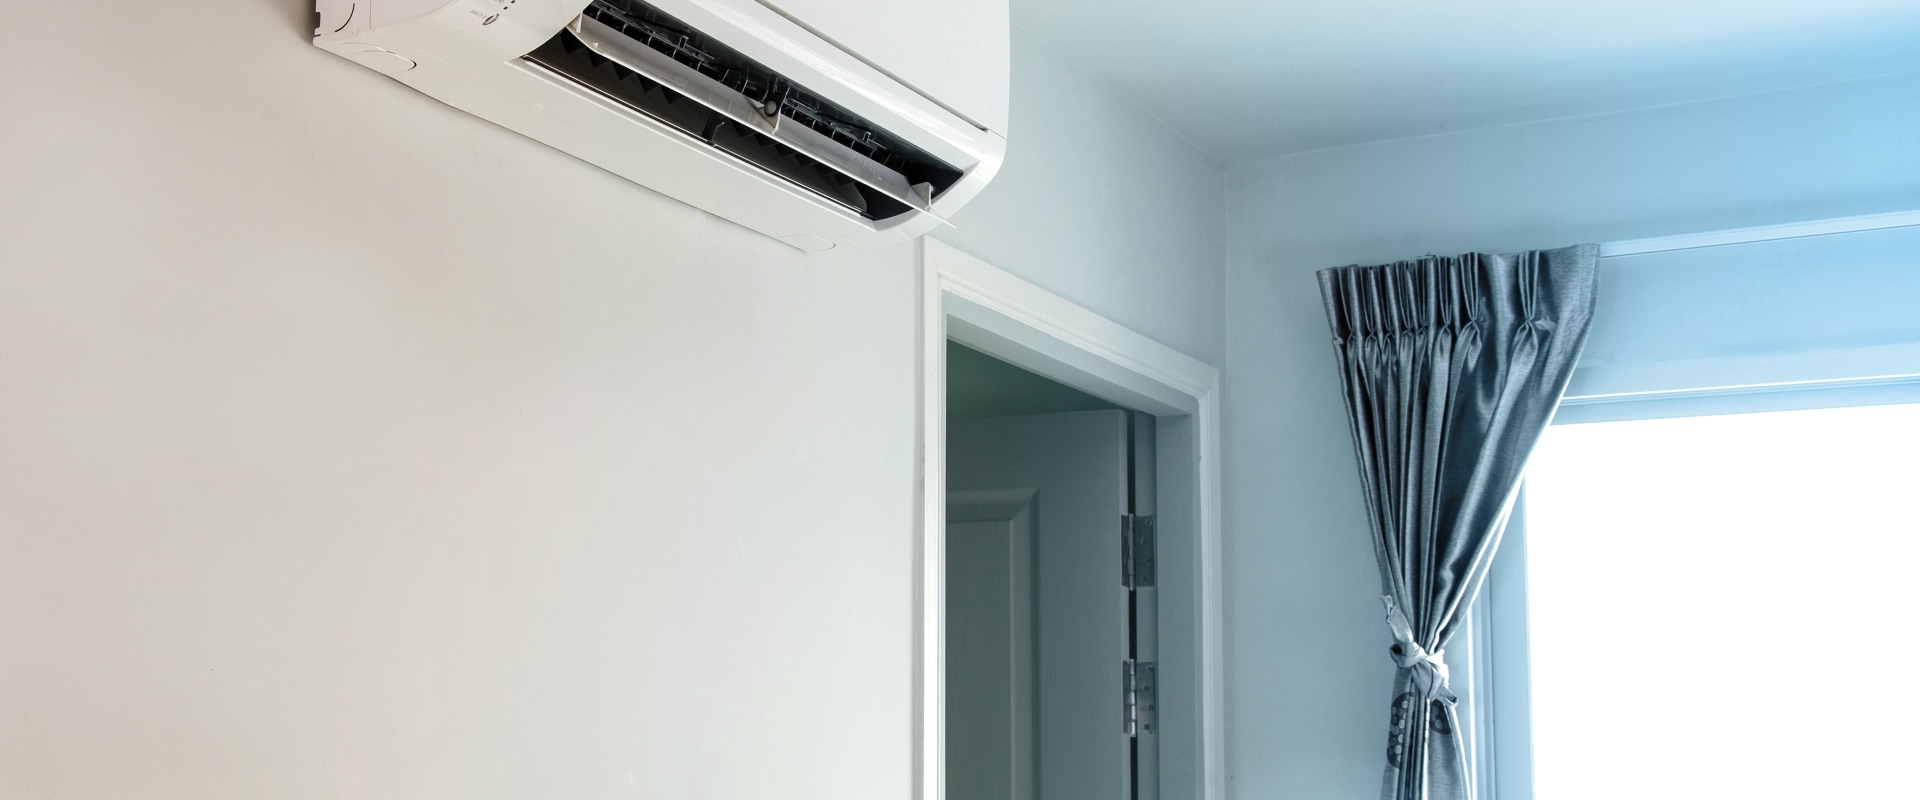 How to Reduce High Humidity in Your Home HVAC System